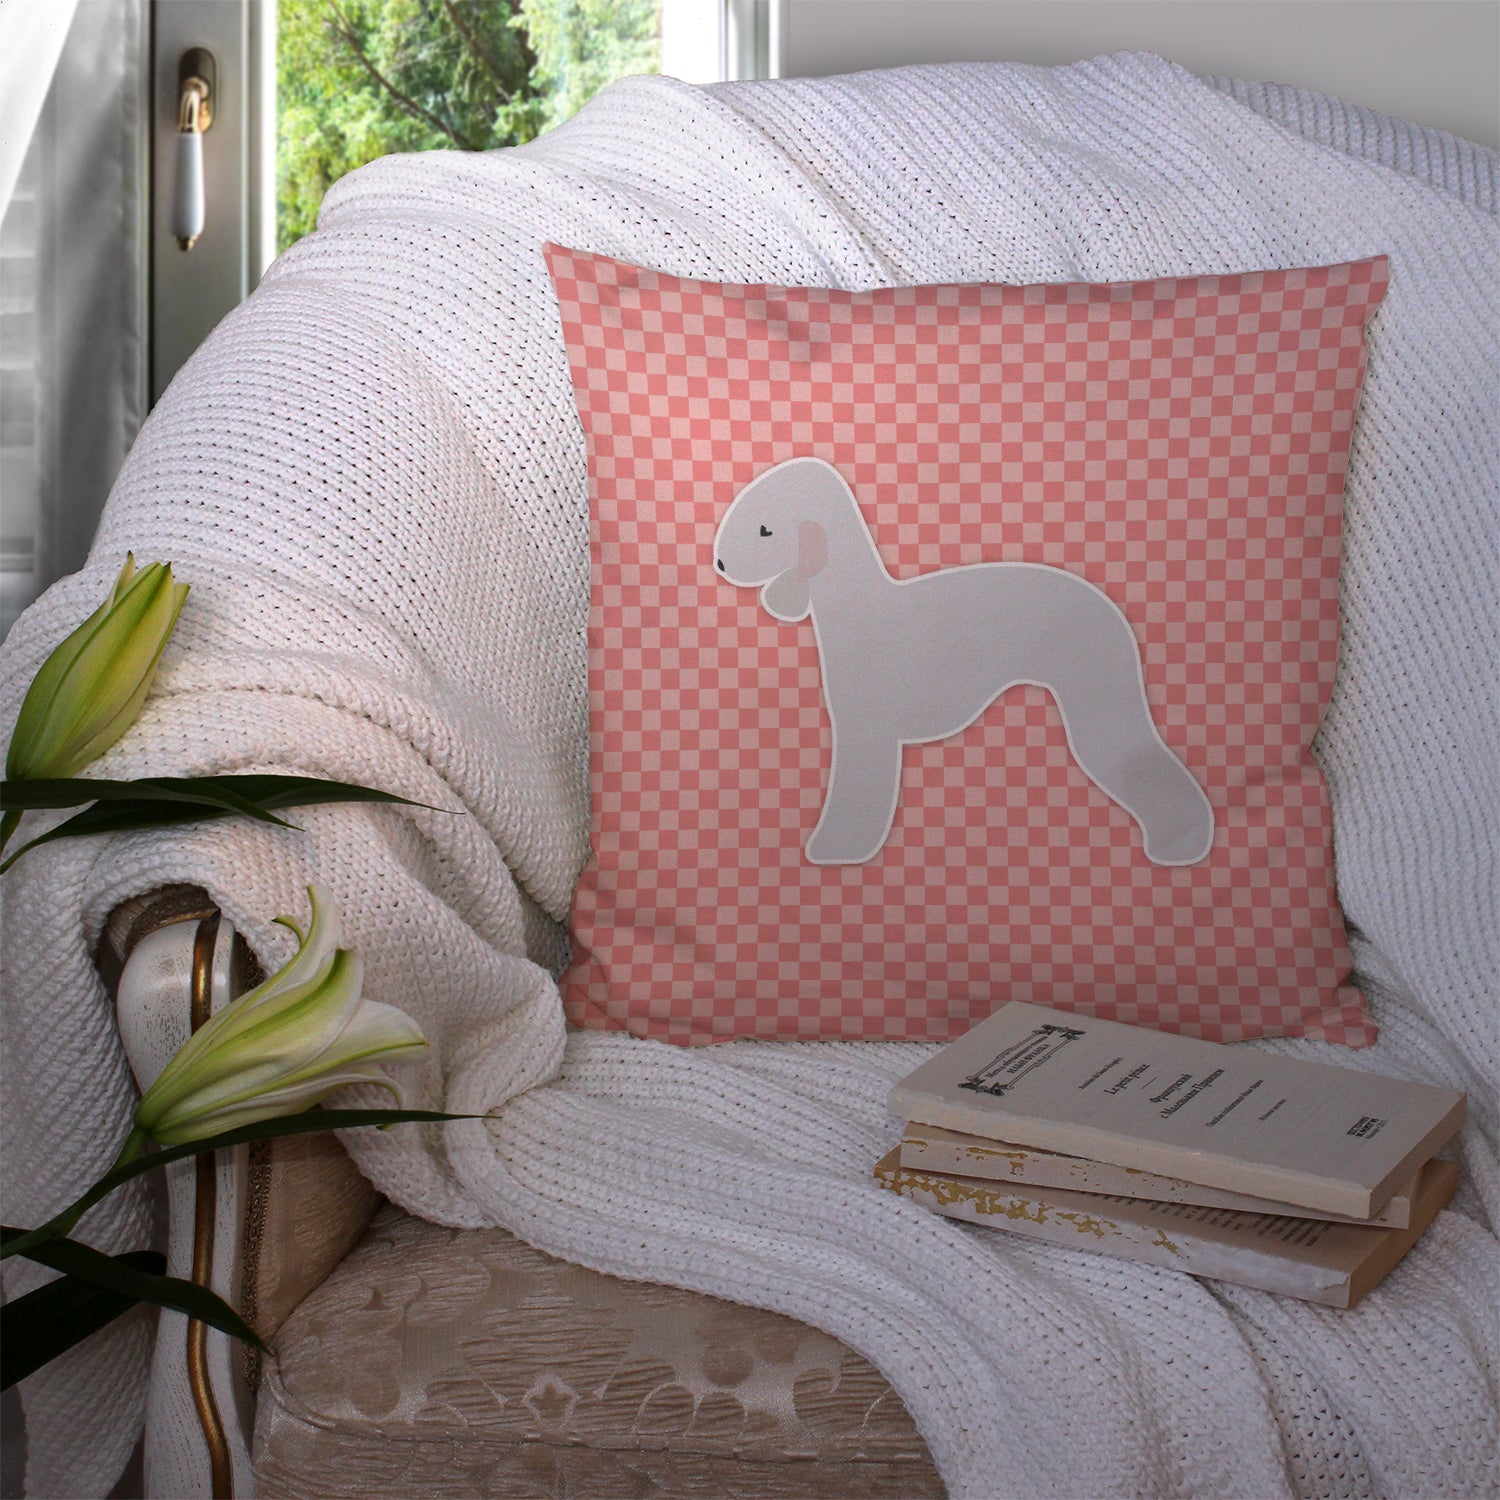 Bedlington Terrier Checkerboard Pink Fabric Decorative Pillow BB3594PW1414 - the-store.com